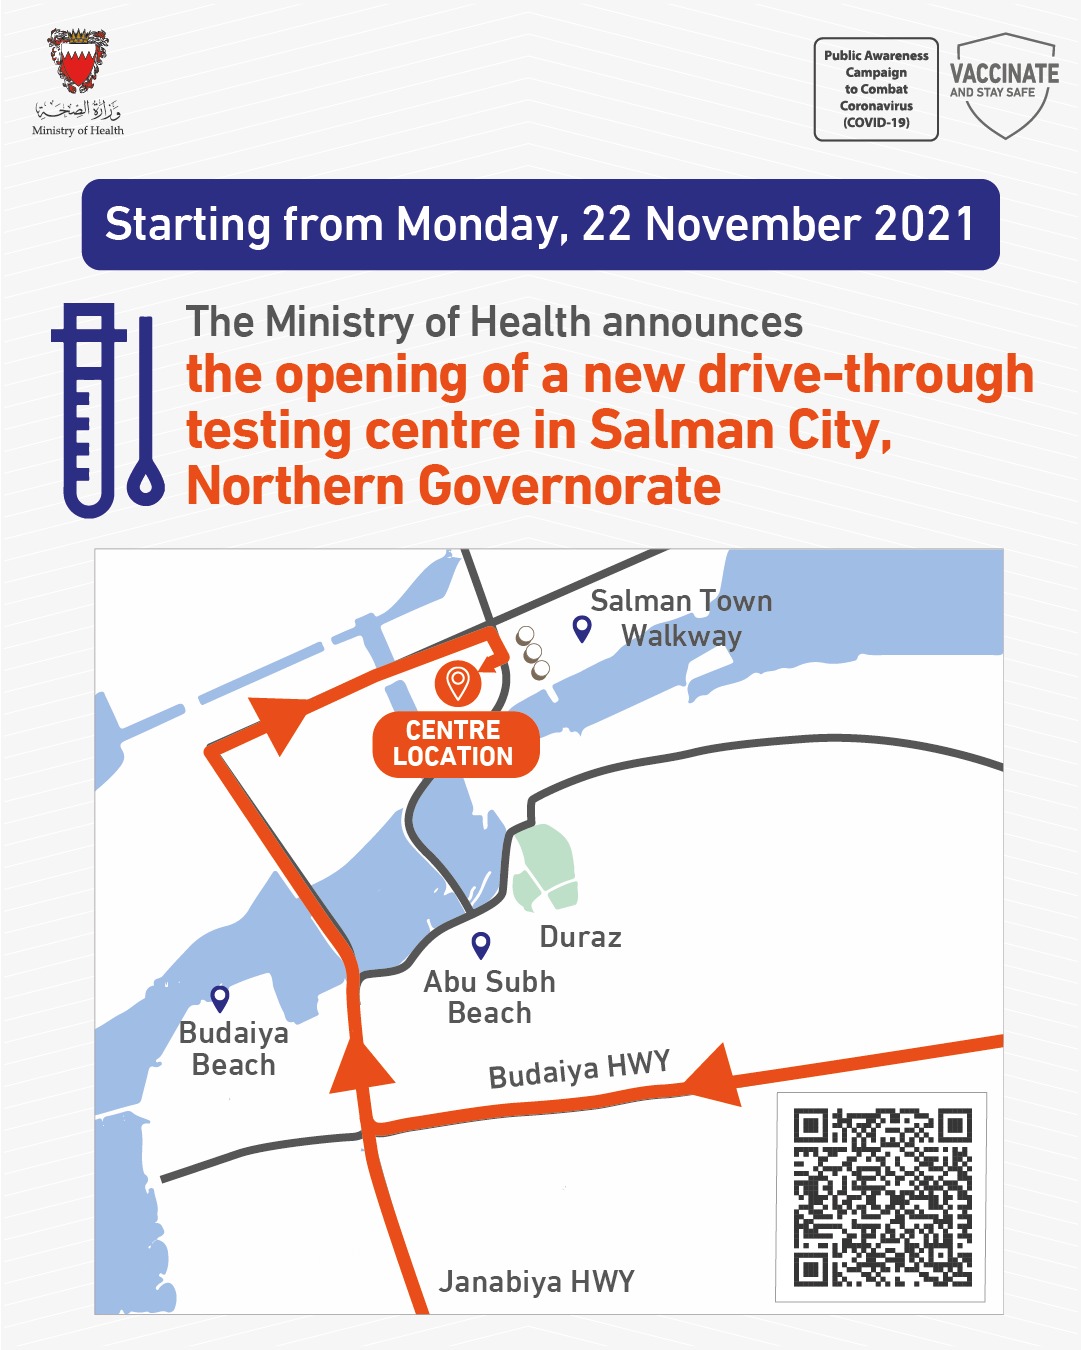 The Ministry of Health opens a new drive-through testing centre in the Northern Governorate: 21 November 2021